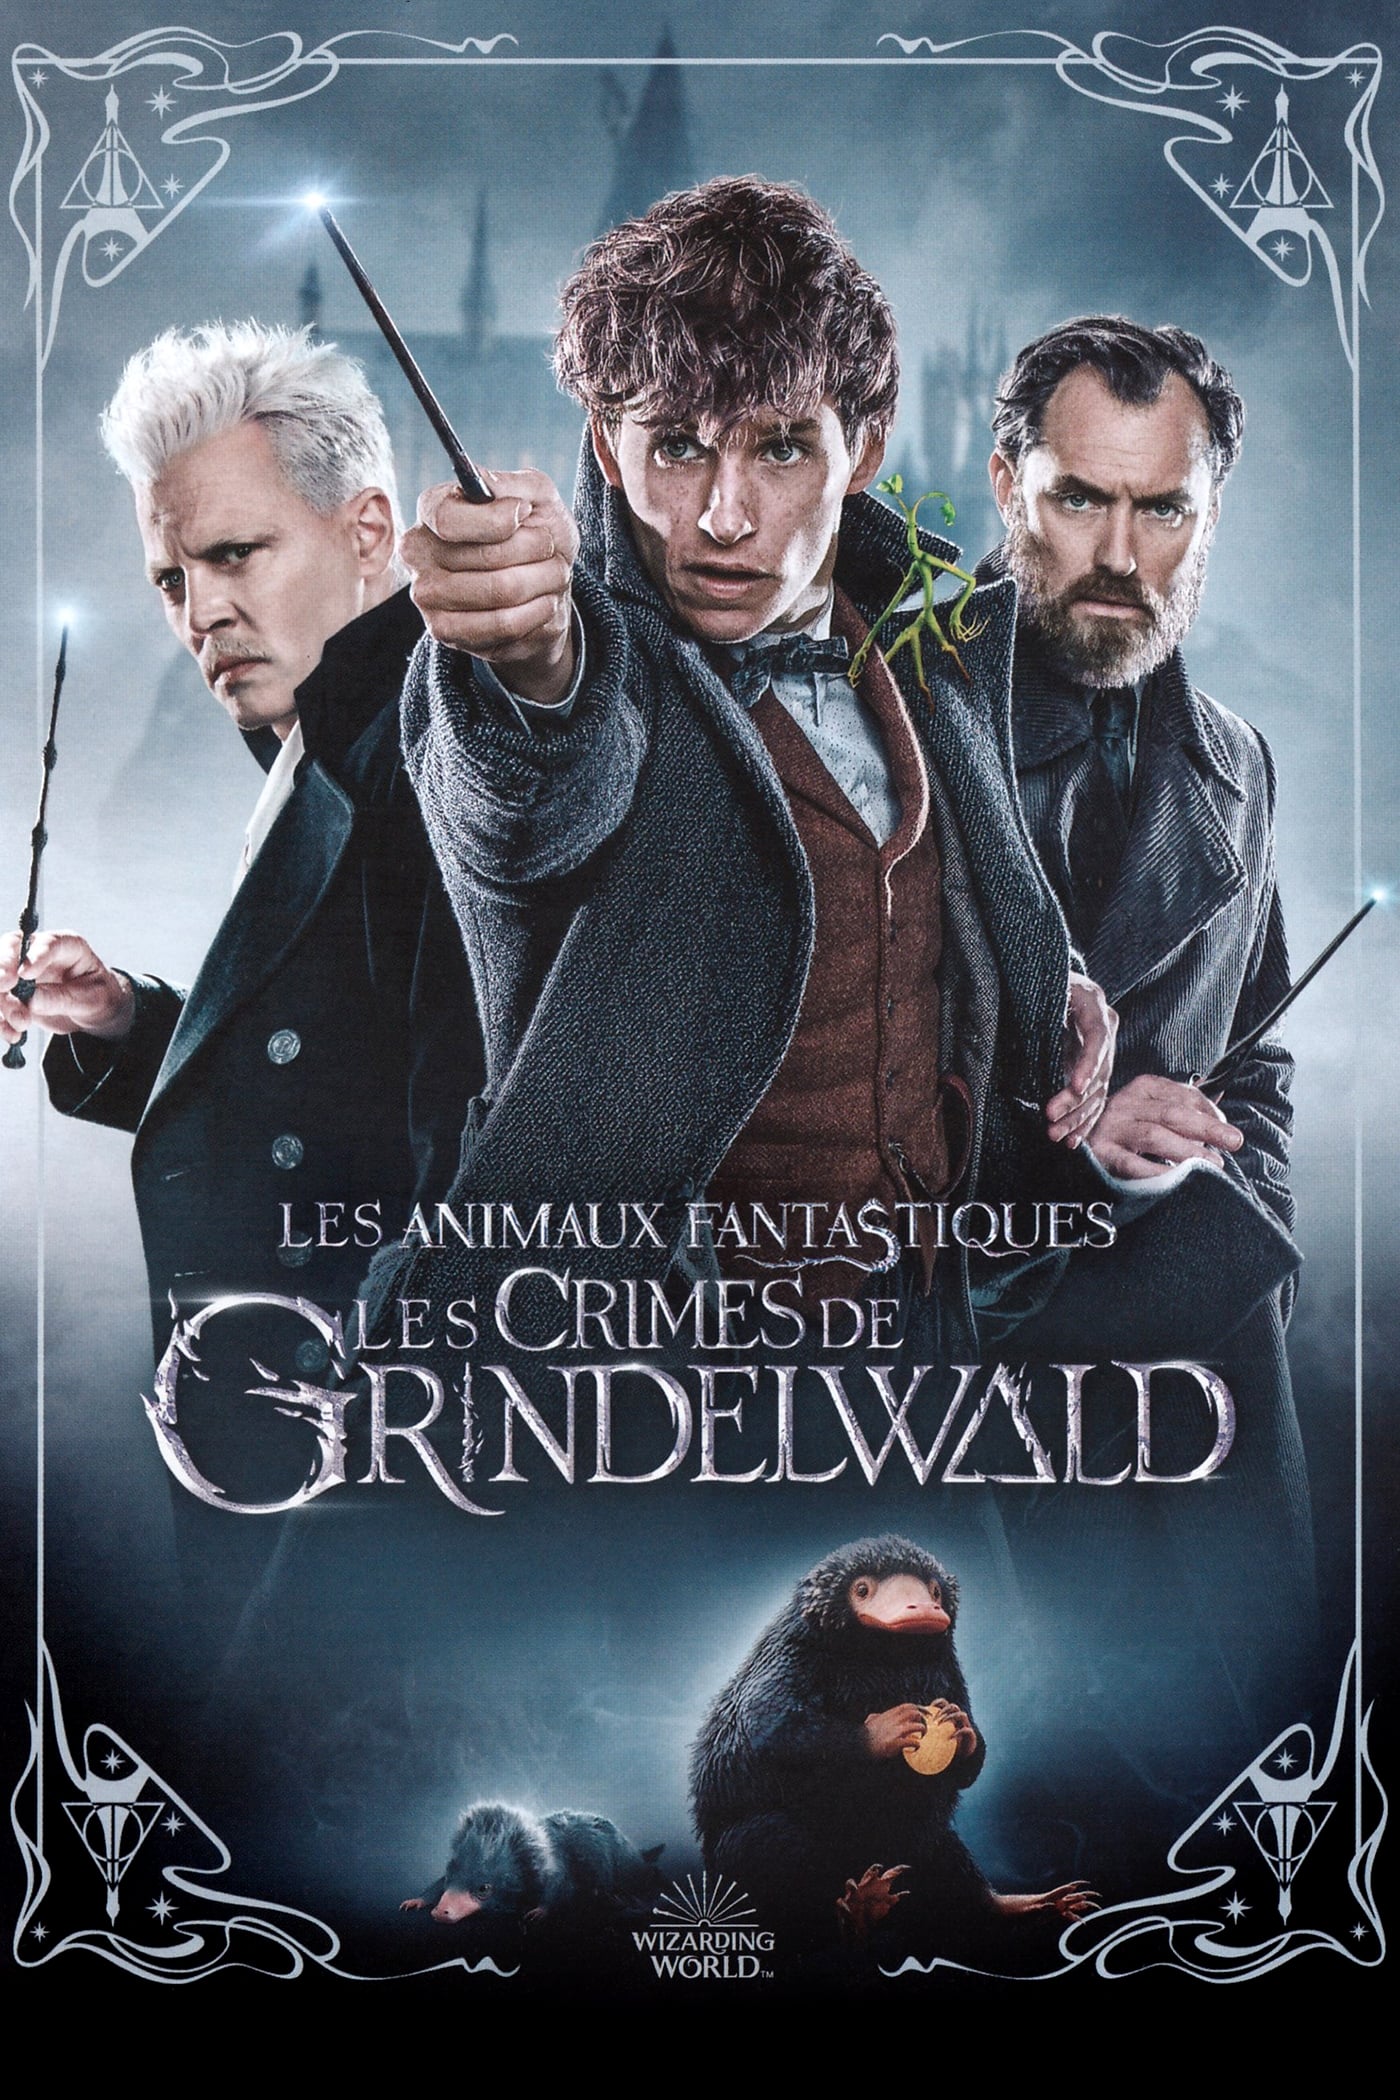 Les Animaux Fantastiques 2 Streaming Vf Complet